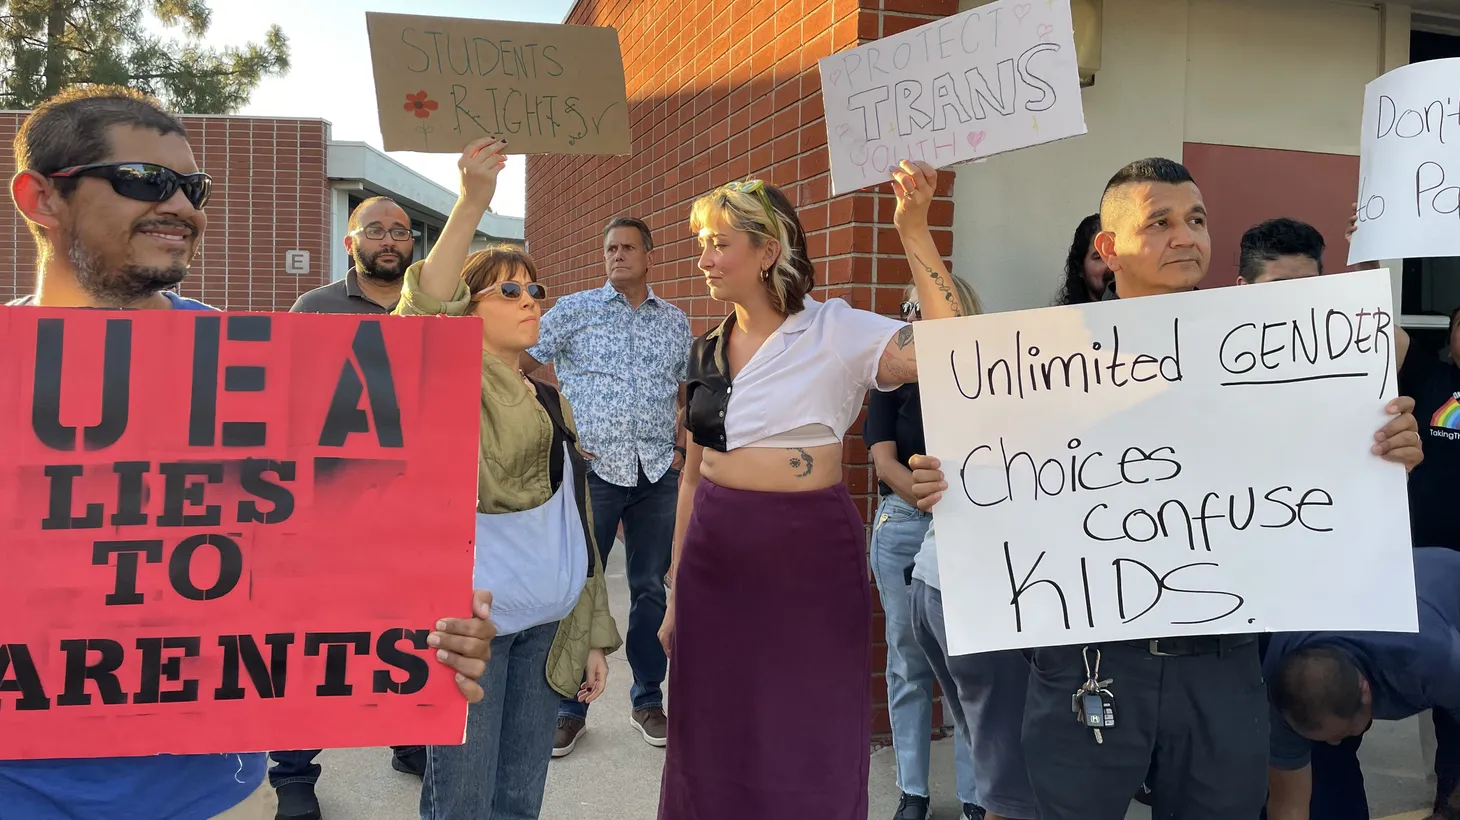 On September 7, protesters at an Orange Unified school board meeting clashed over the district’s parental notification policy, which critics call “forced outing.”